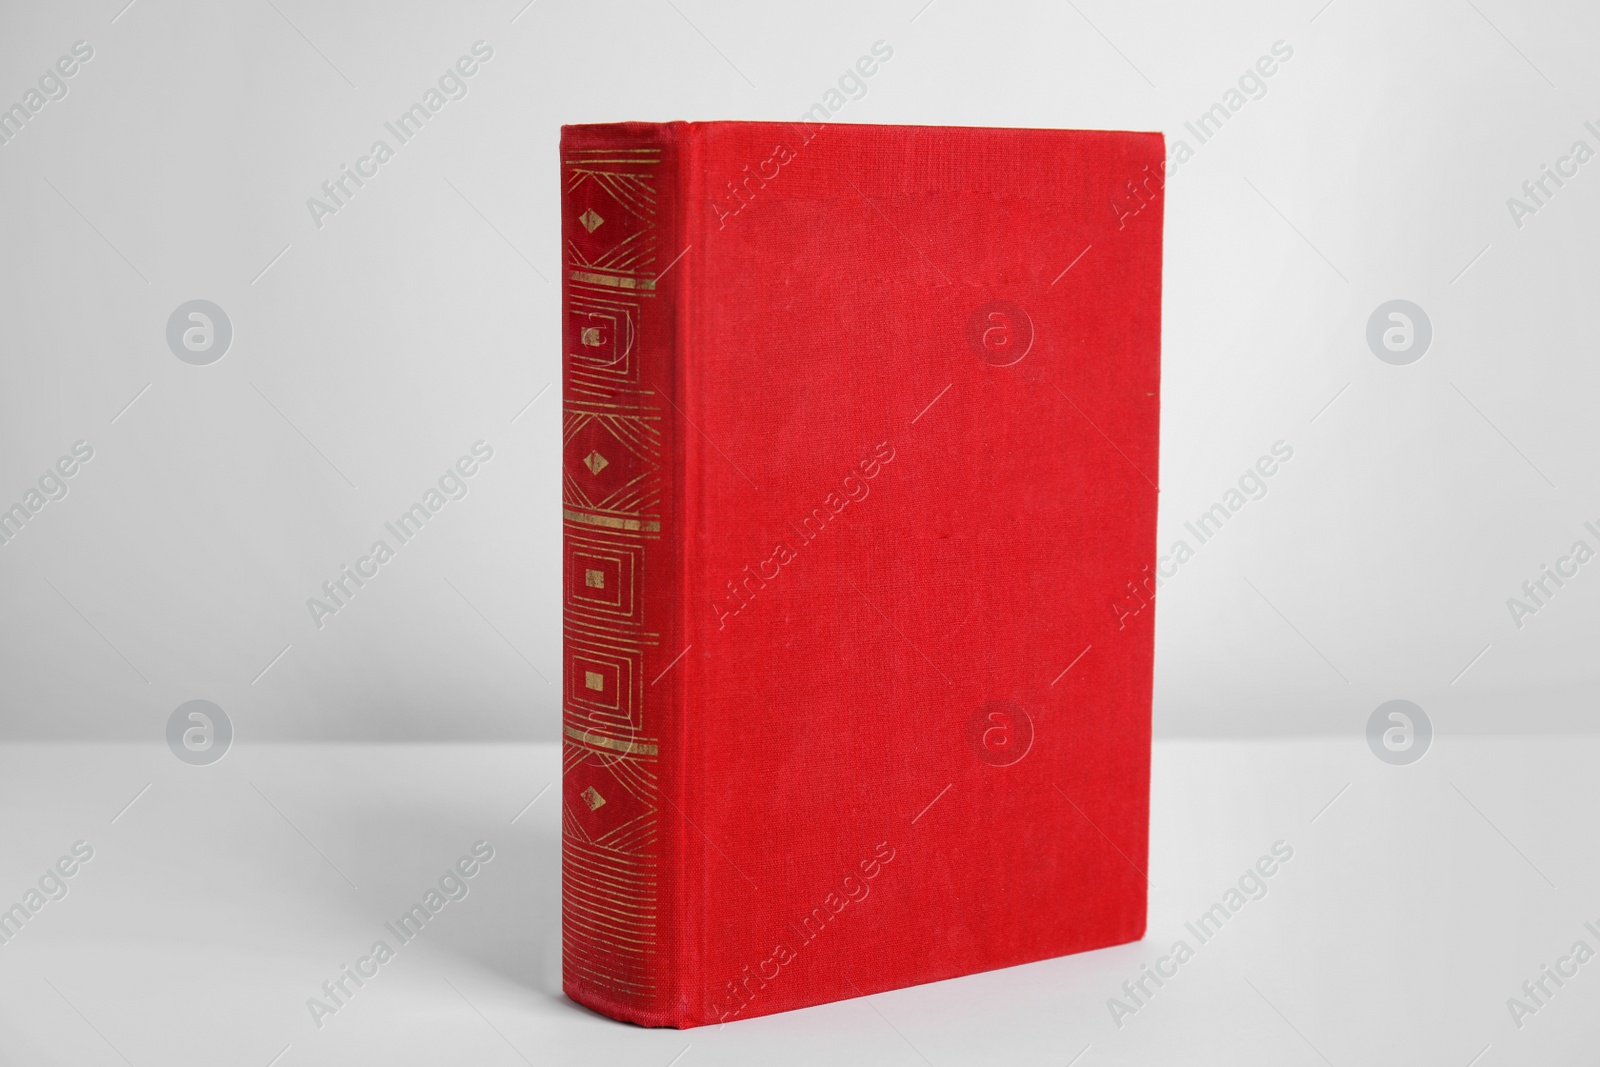 Photo of Blank book with hardcover on white background